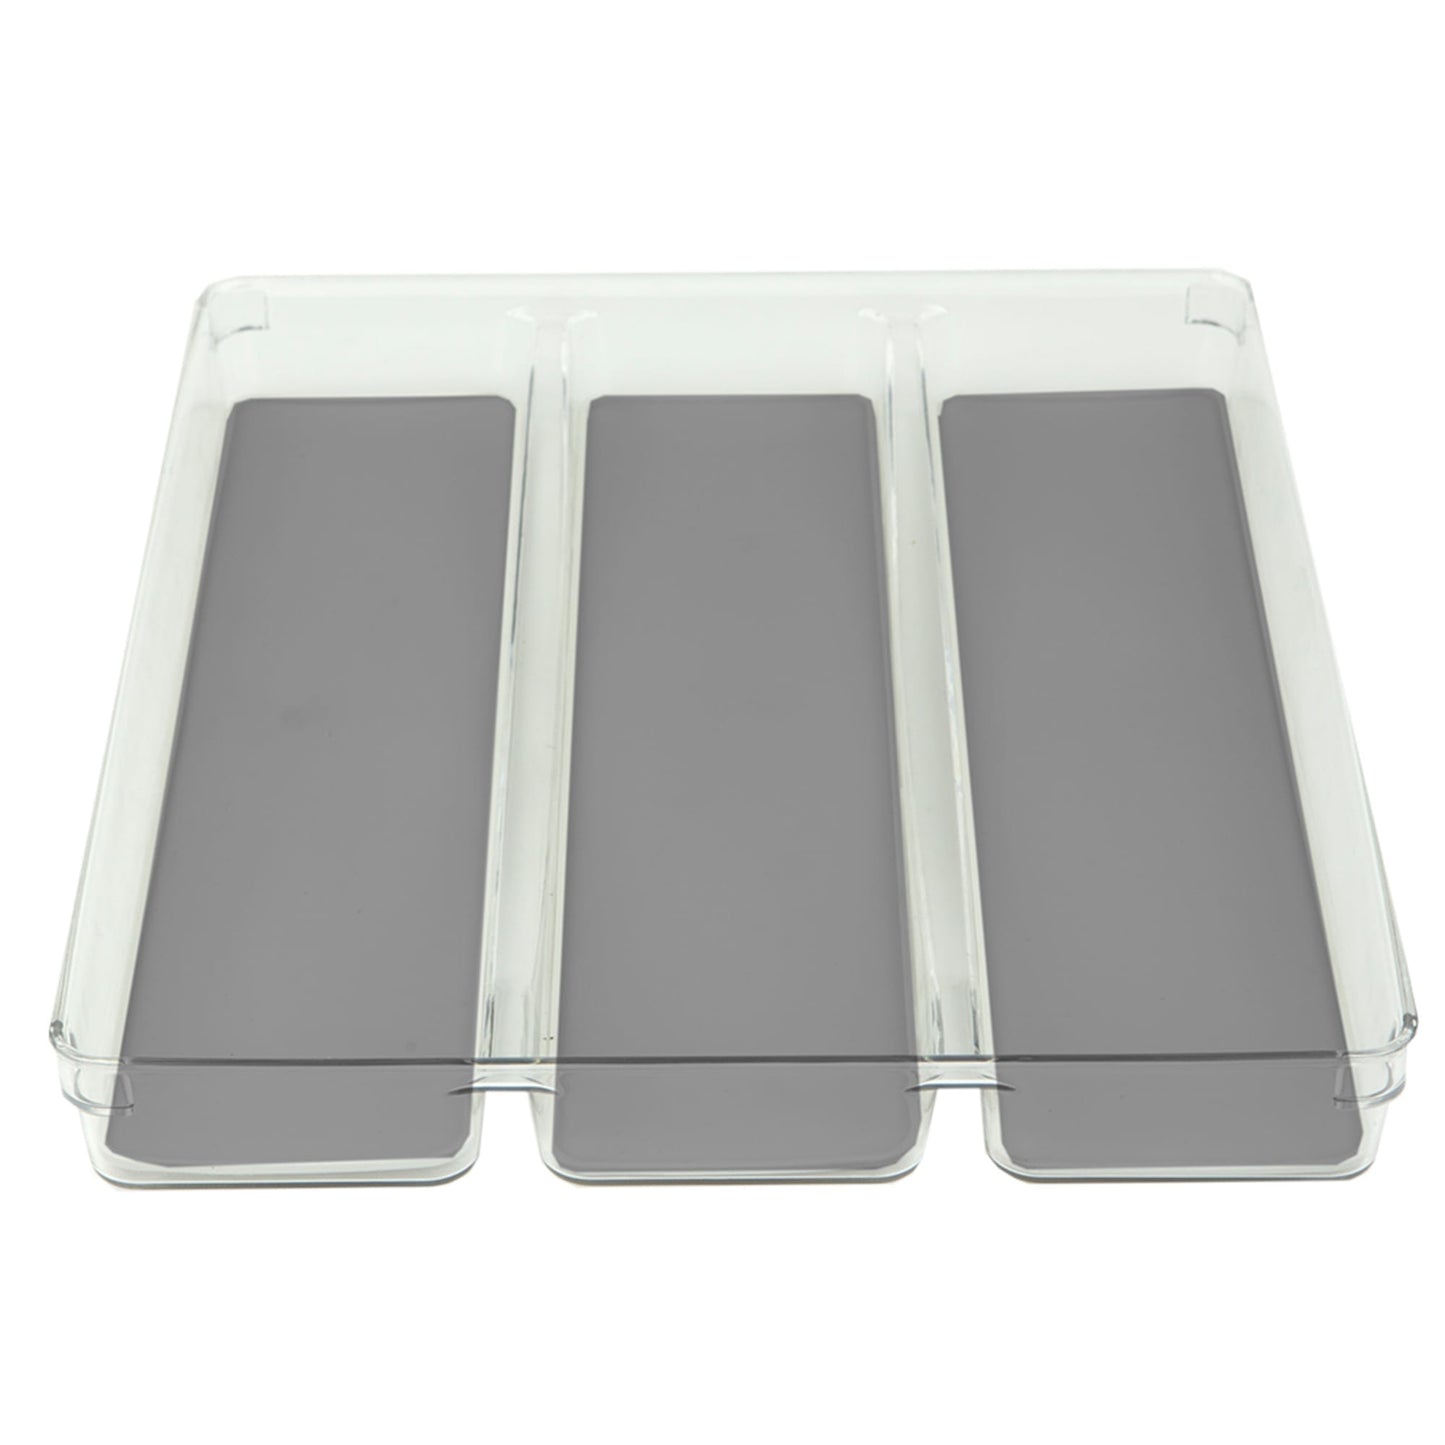 12" x 15" x 2"  Plastic Drawer Organizer with Rubber Liner